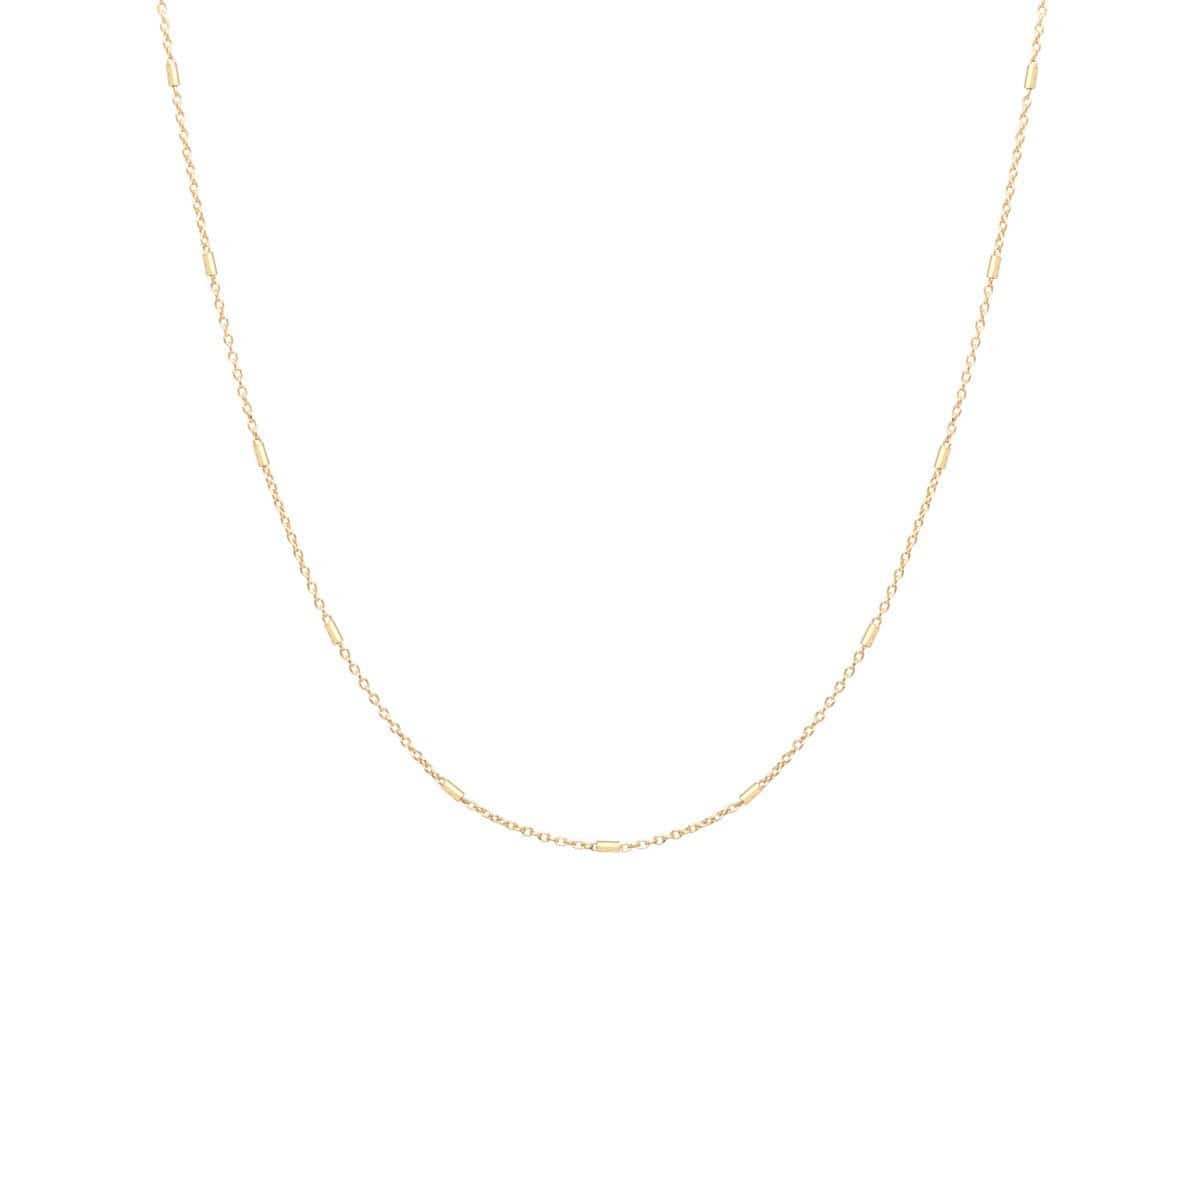 NKL-14K 16" 14K GOLD TINY BAR CABLE CHAIN NECKLACE